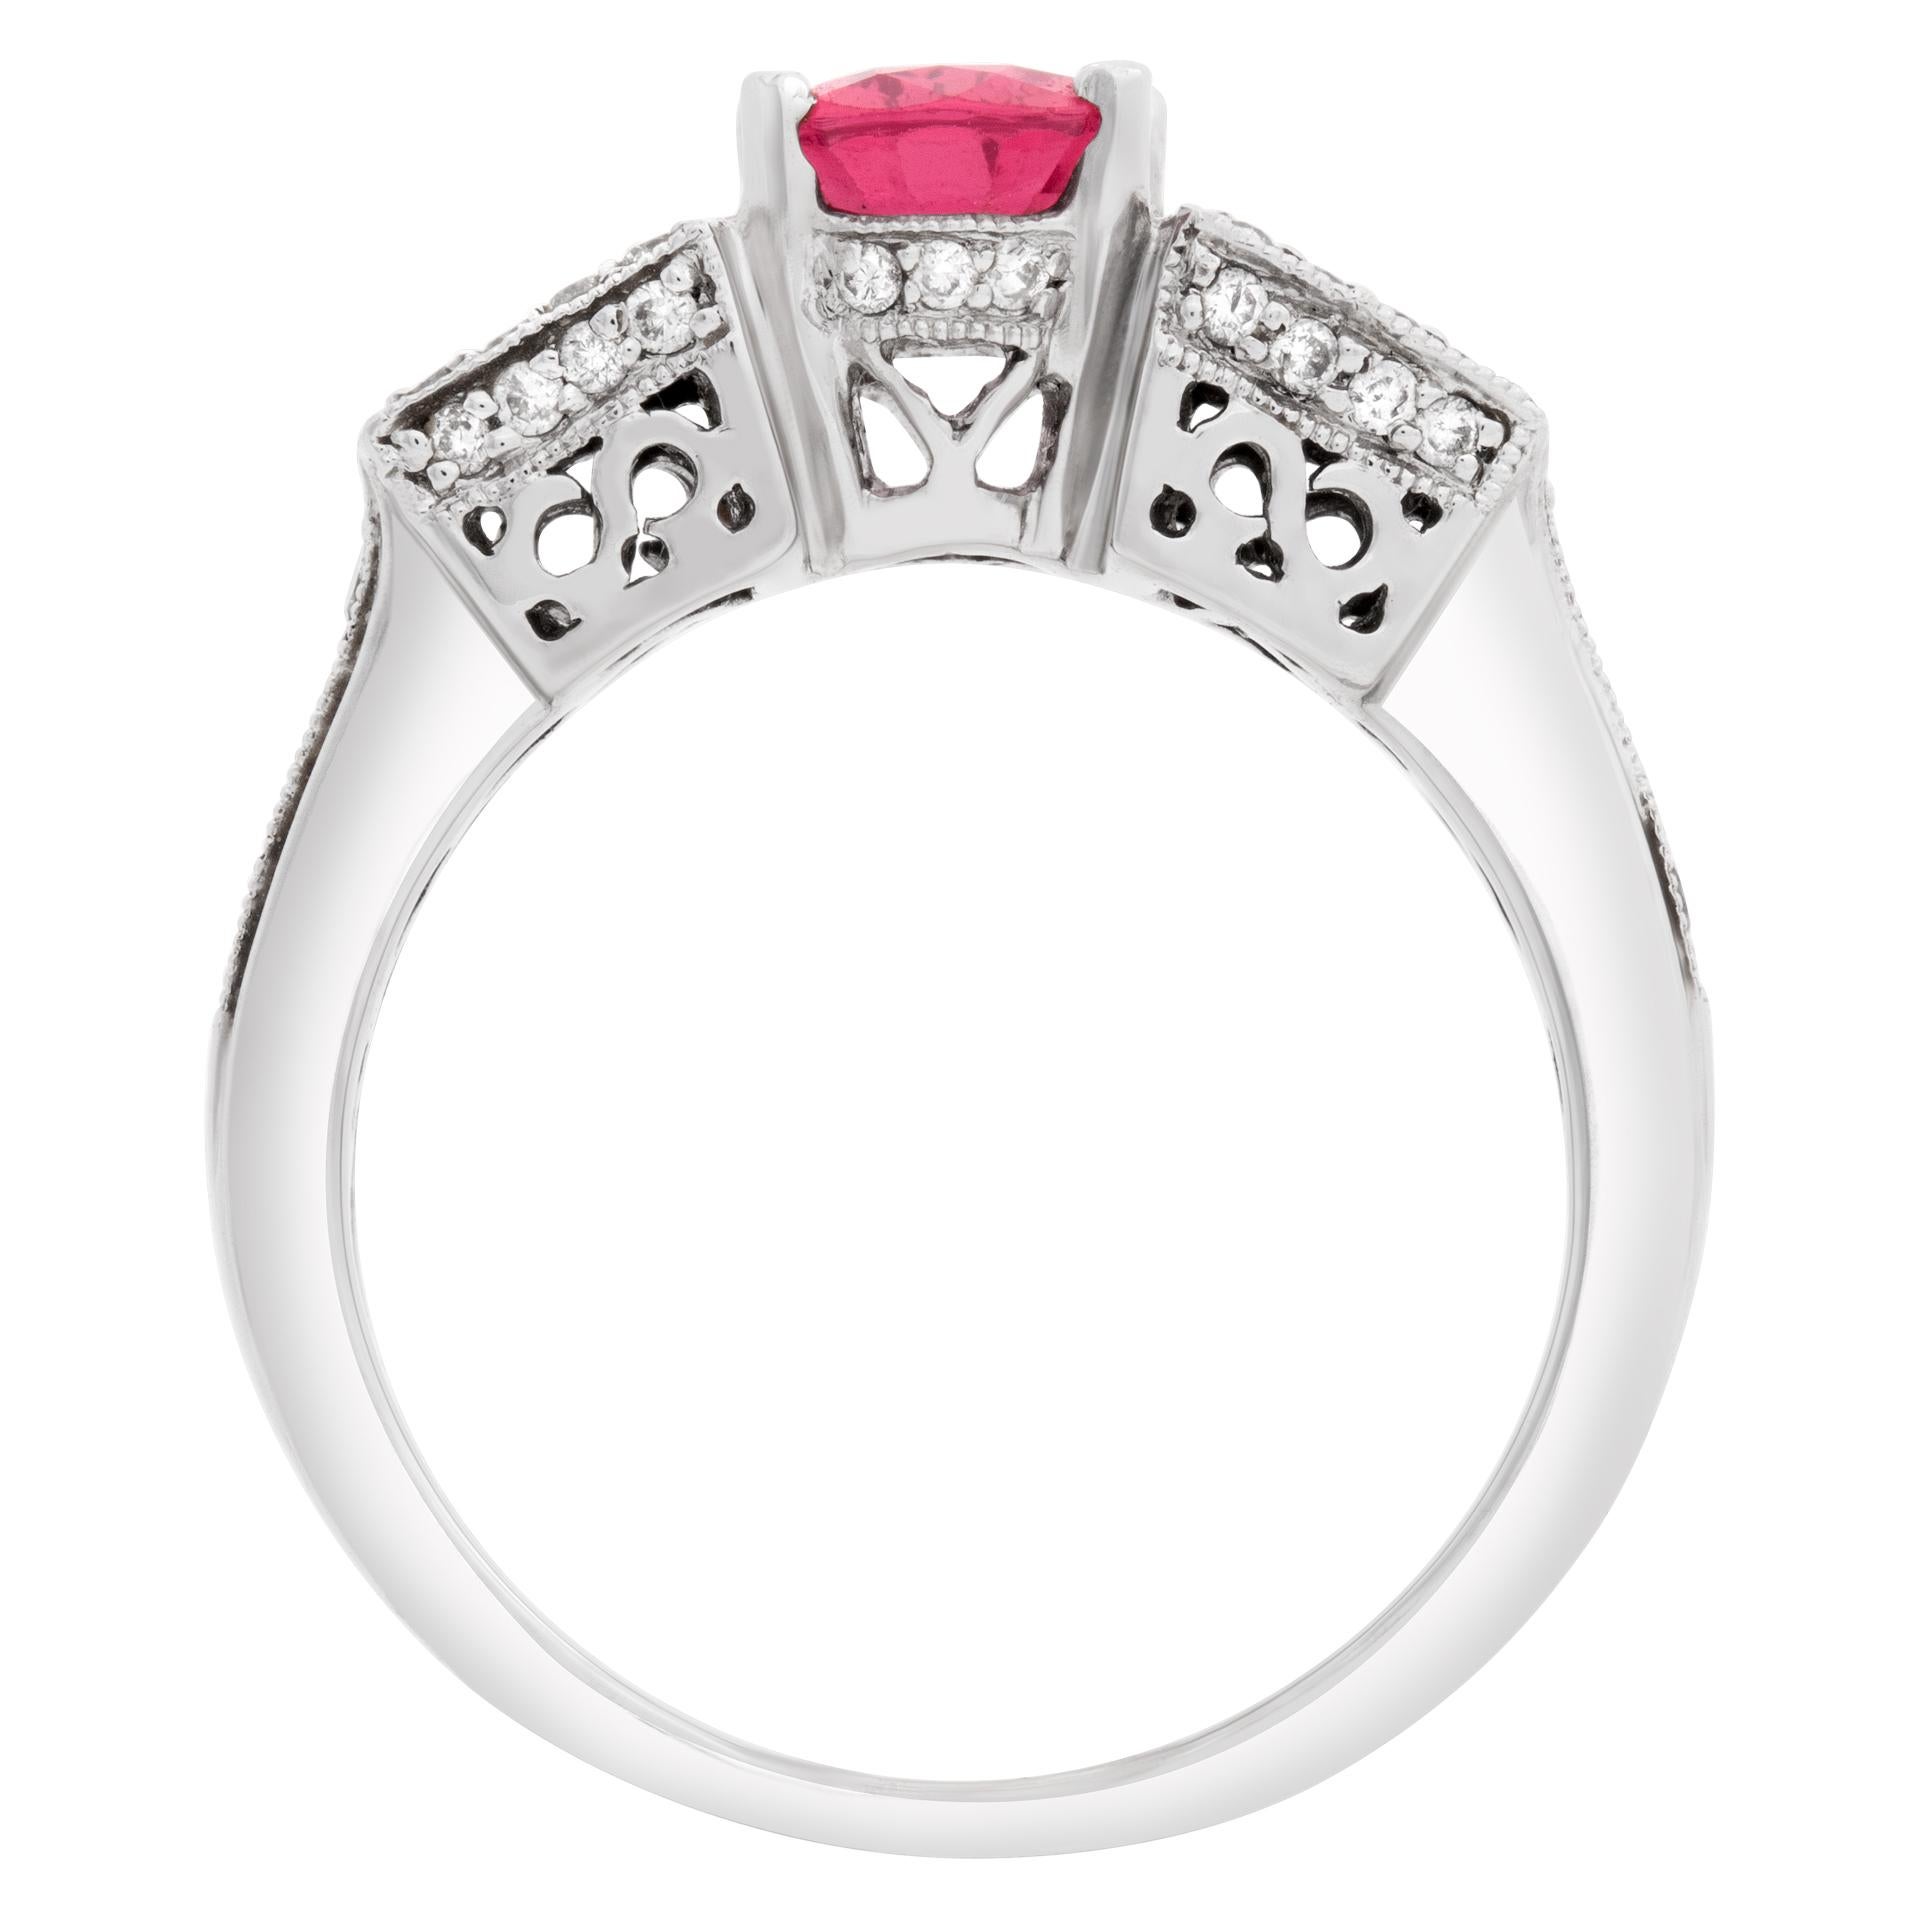 Women's 14K White Gold Ring with Oval Brilliant Cut Pink Spinel 'Approx. 2 Carats'